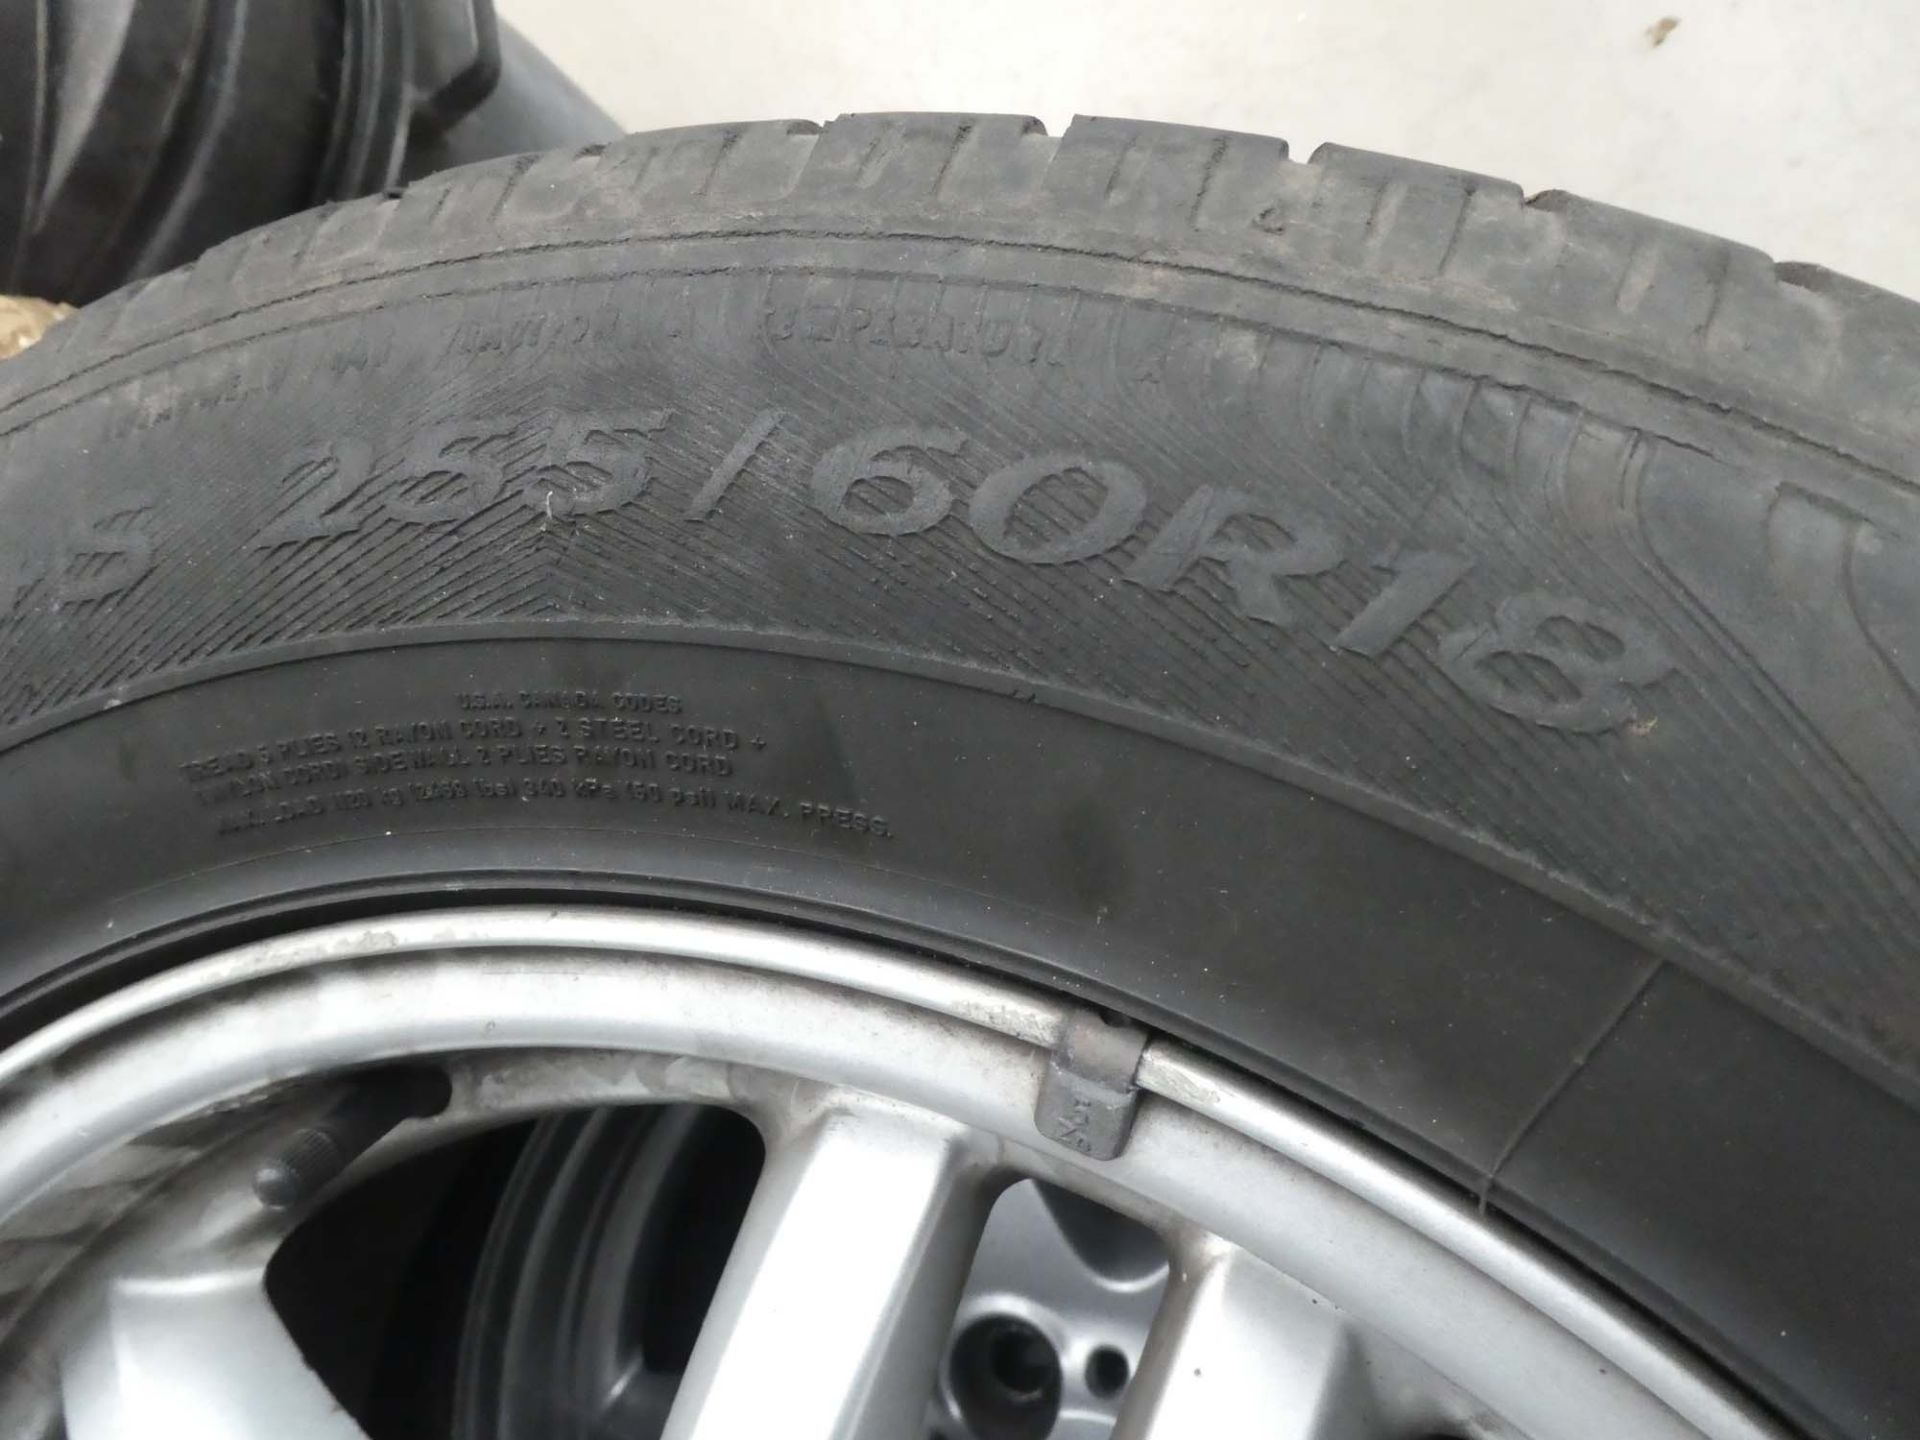 4 Land Rover alloy wheels and tyres, size 2556018 - Image 2 of 2